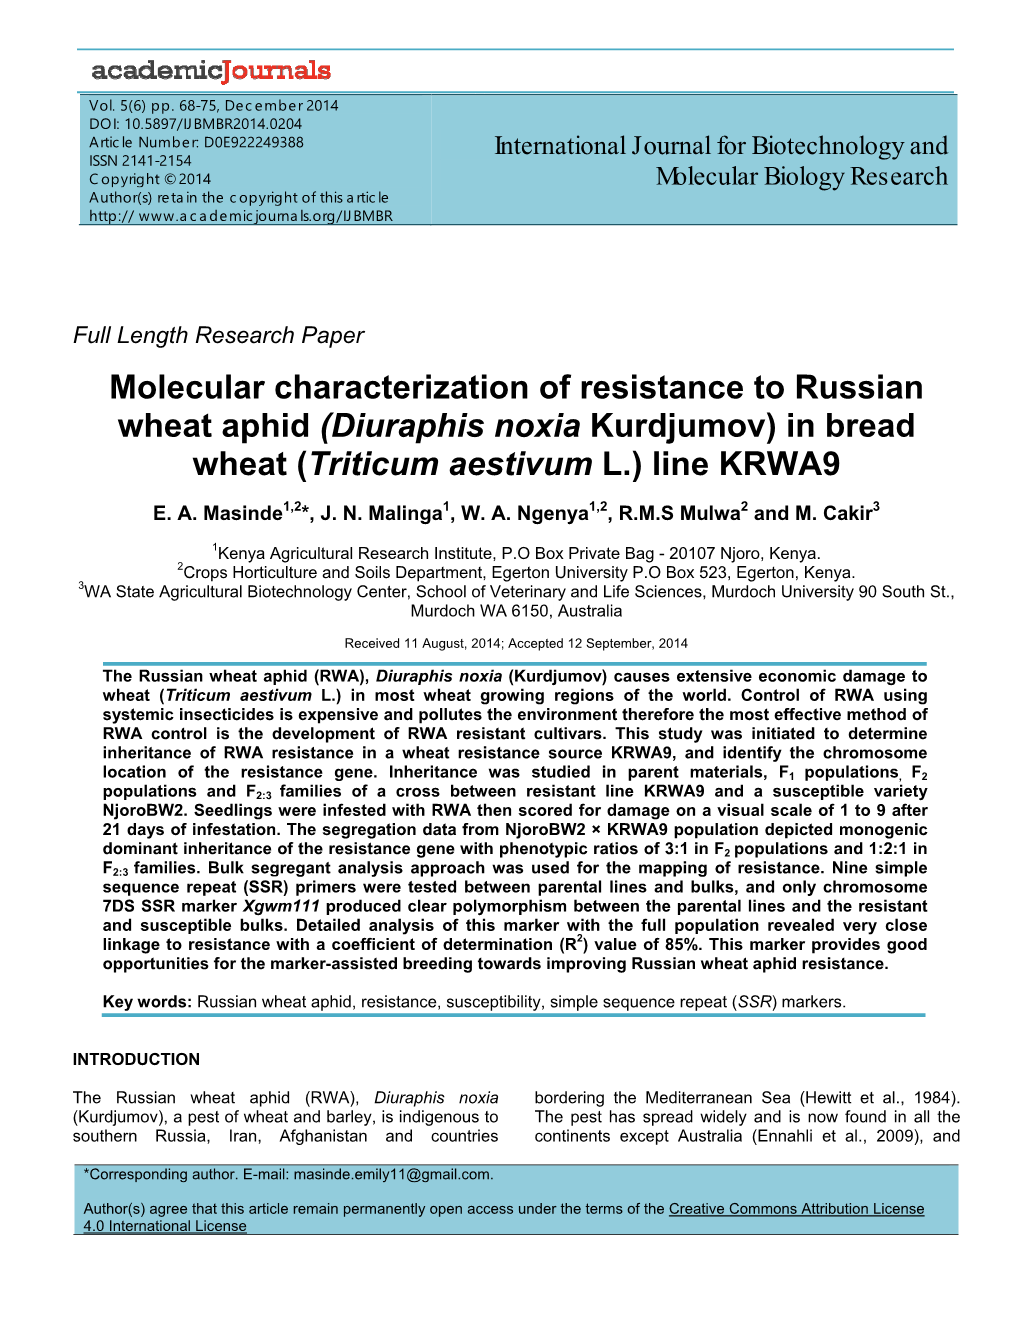 Molecular Characterization of Resistance to Russian Wheat Aphid (Diuraphis Noxia Kurdjumov) in Bread Wheat (Triticum Aestivum L.) Line KRWA9